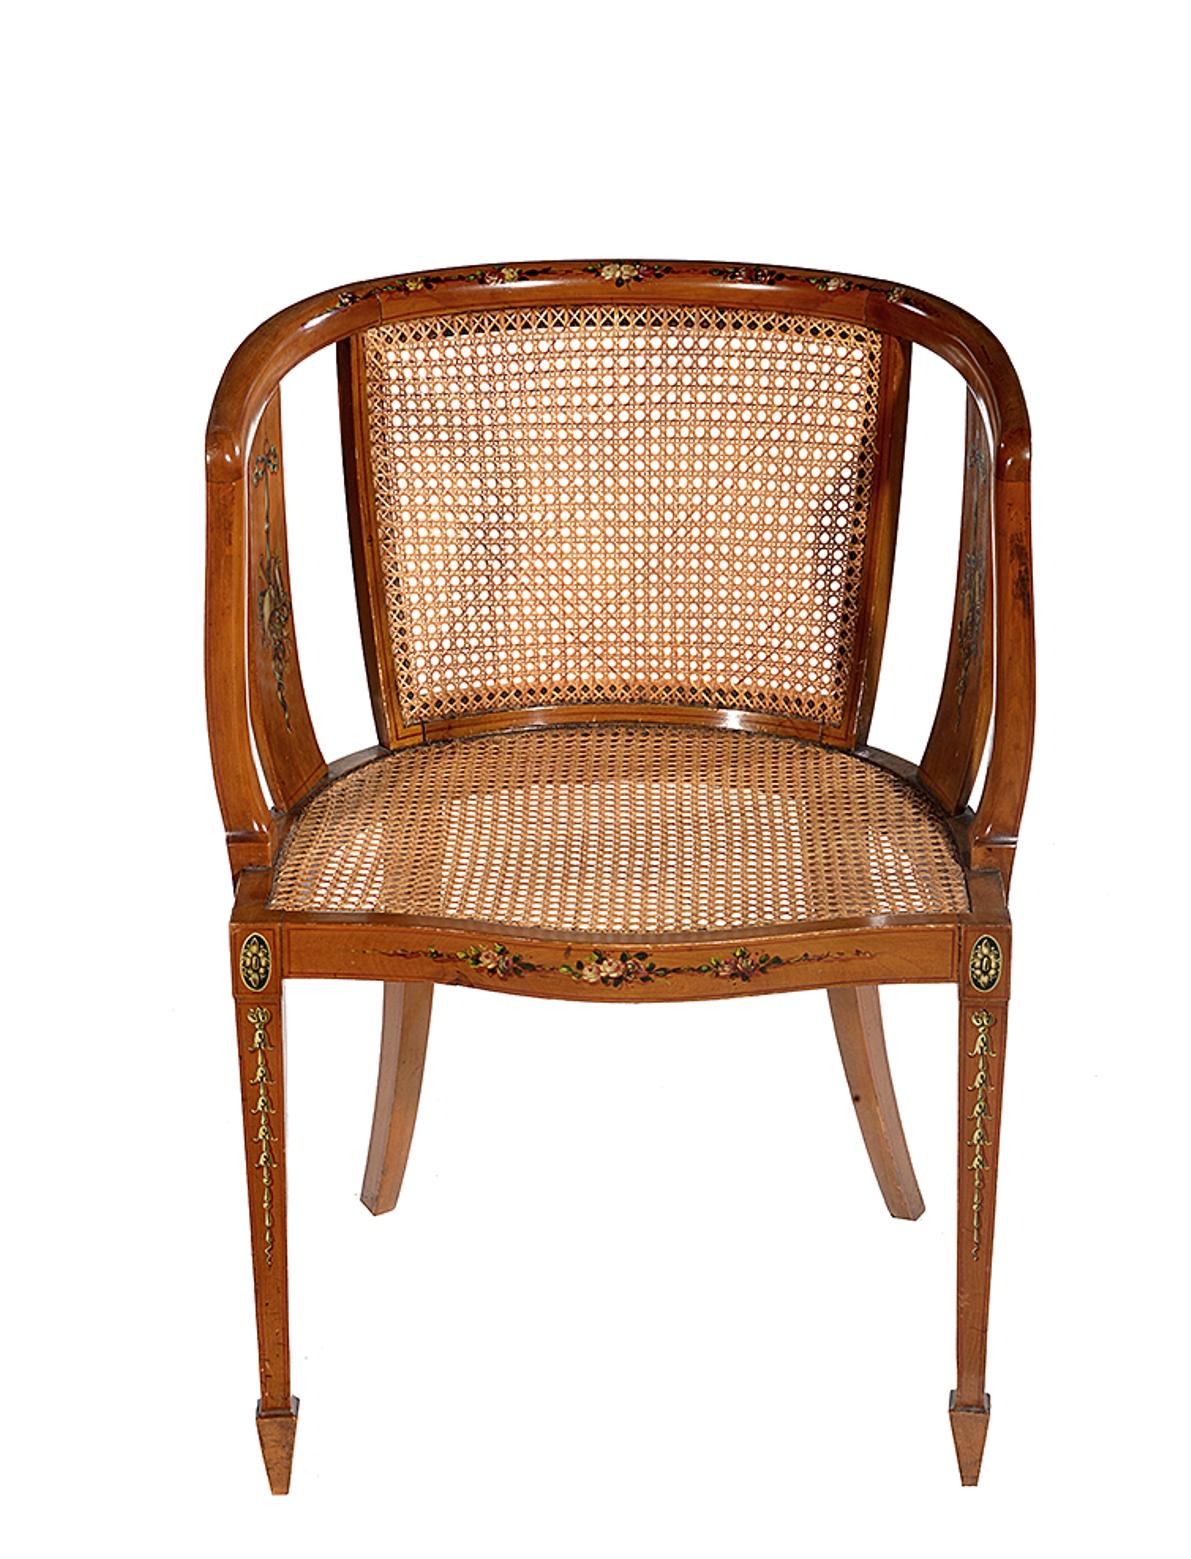 Hand-Painted Sheraton Style Satinwood Chair with Painted Decoration For Sale